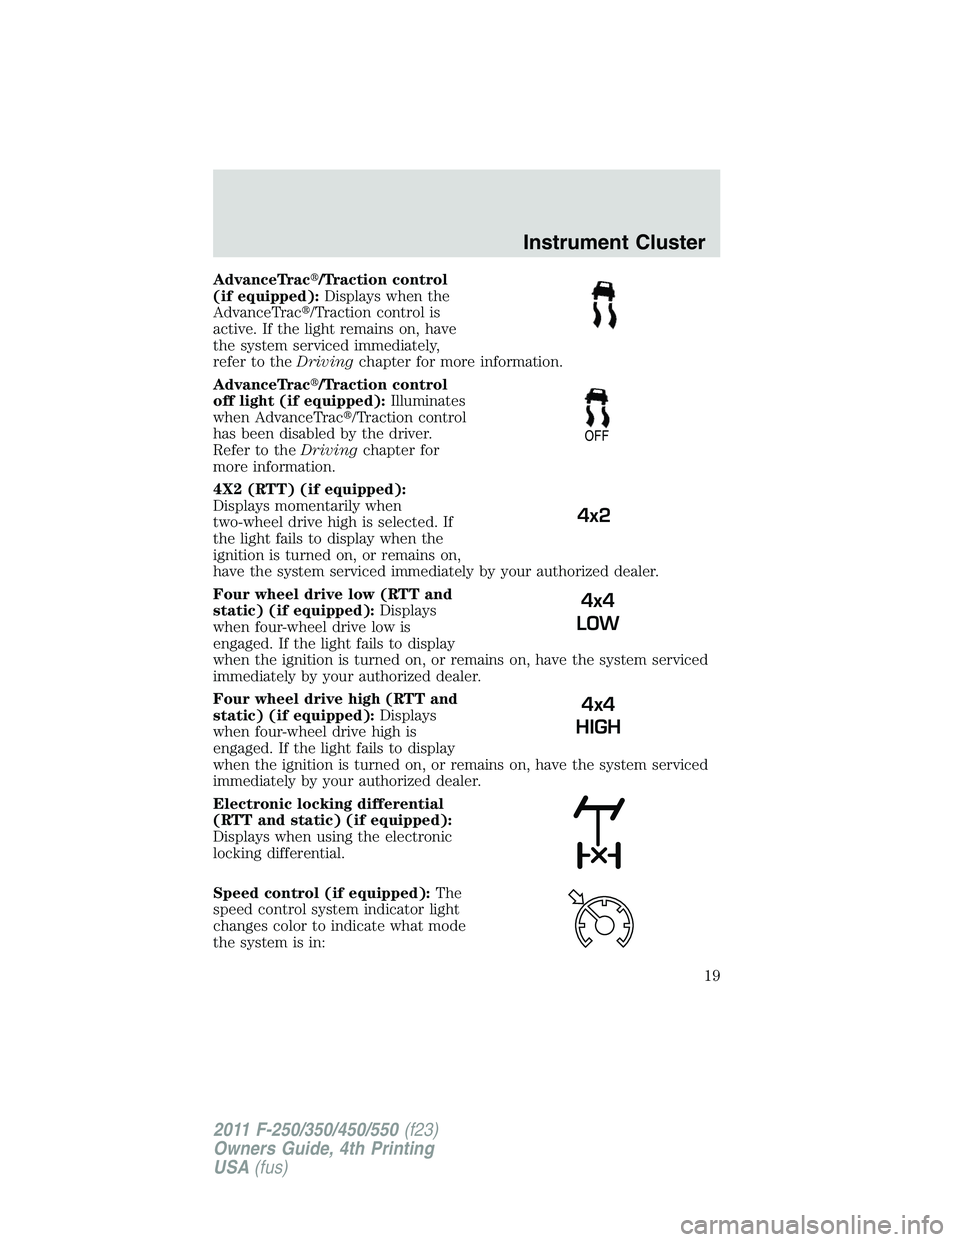 FORD F450 2011  Owners Manual AdvanceTrac  /Traction control
(if equipped): Displays when the
AdvanceTrac  /Traction control is
active. If the light remains on, have
the system serviced immediately,
refer to the Driving chapter 